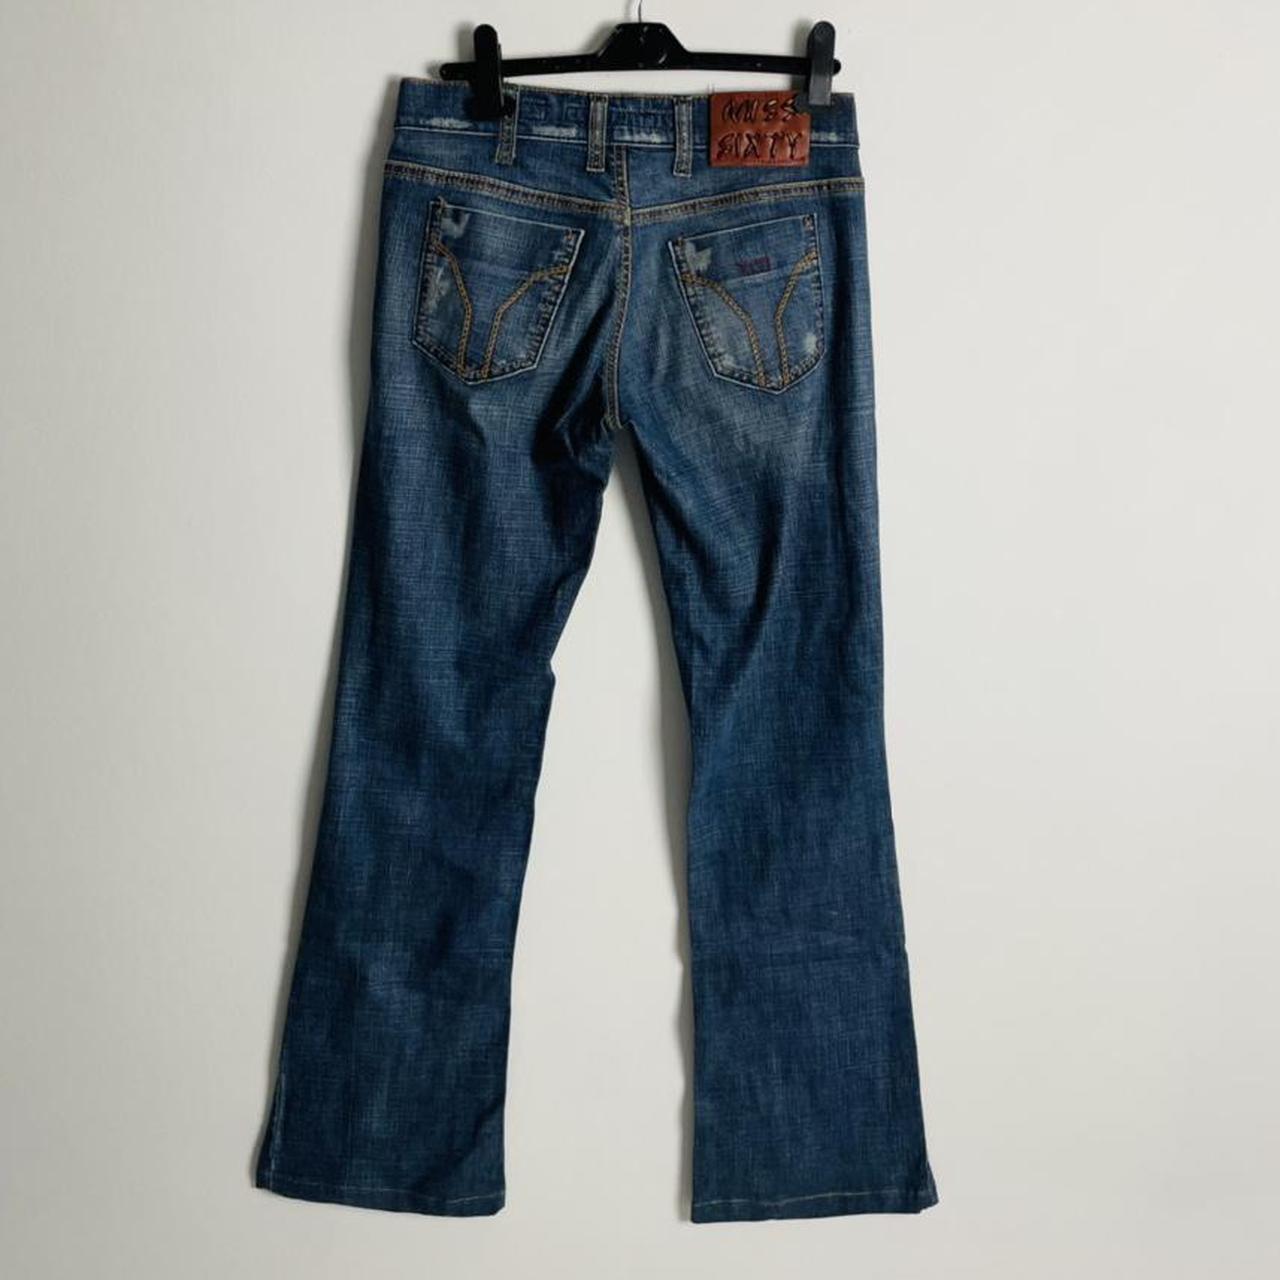 Product Image 2 - Miss sixty flared jeans 

SIZE